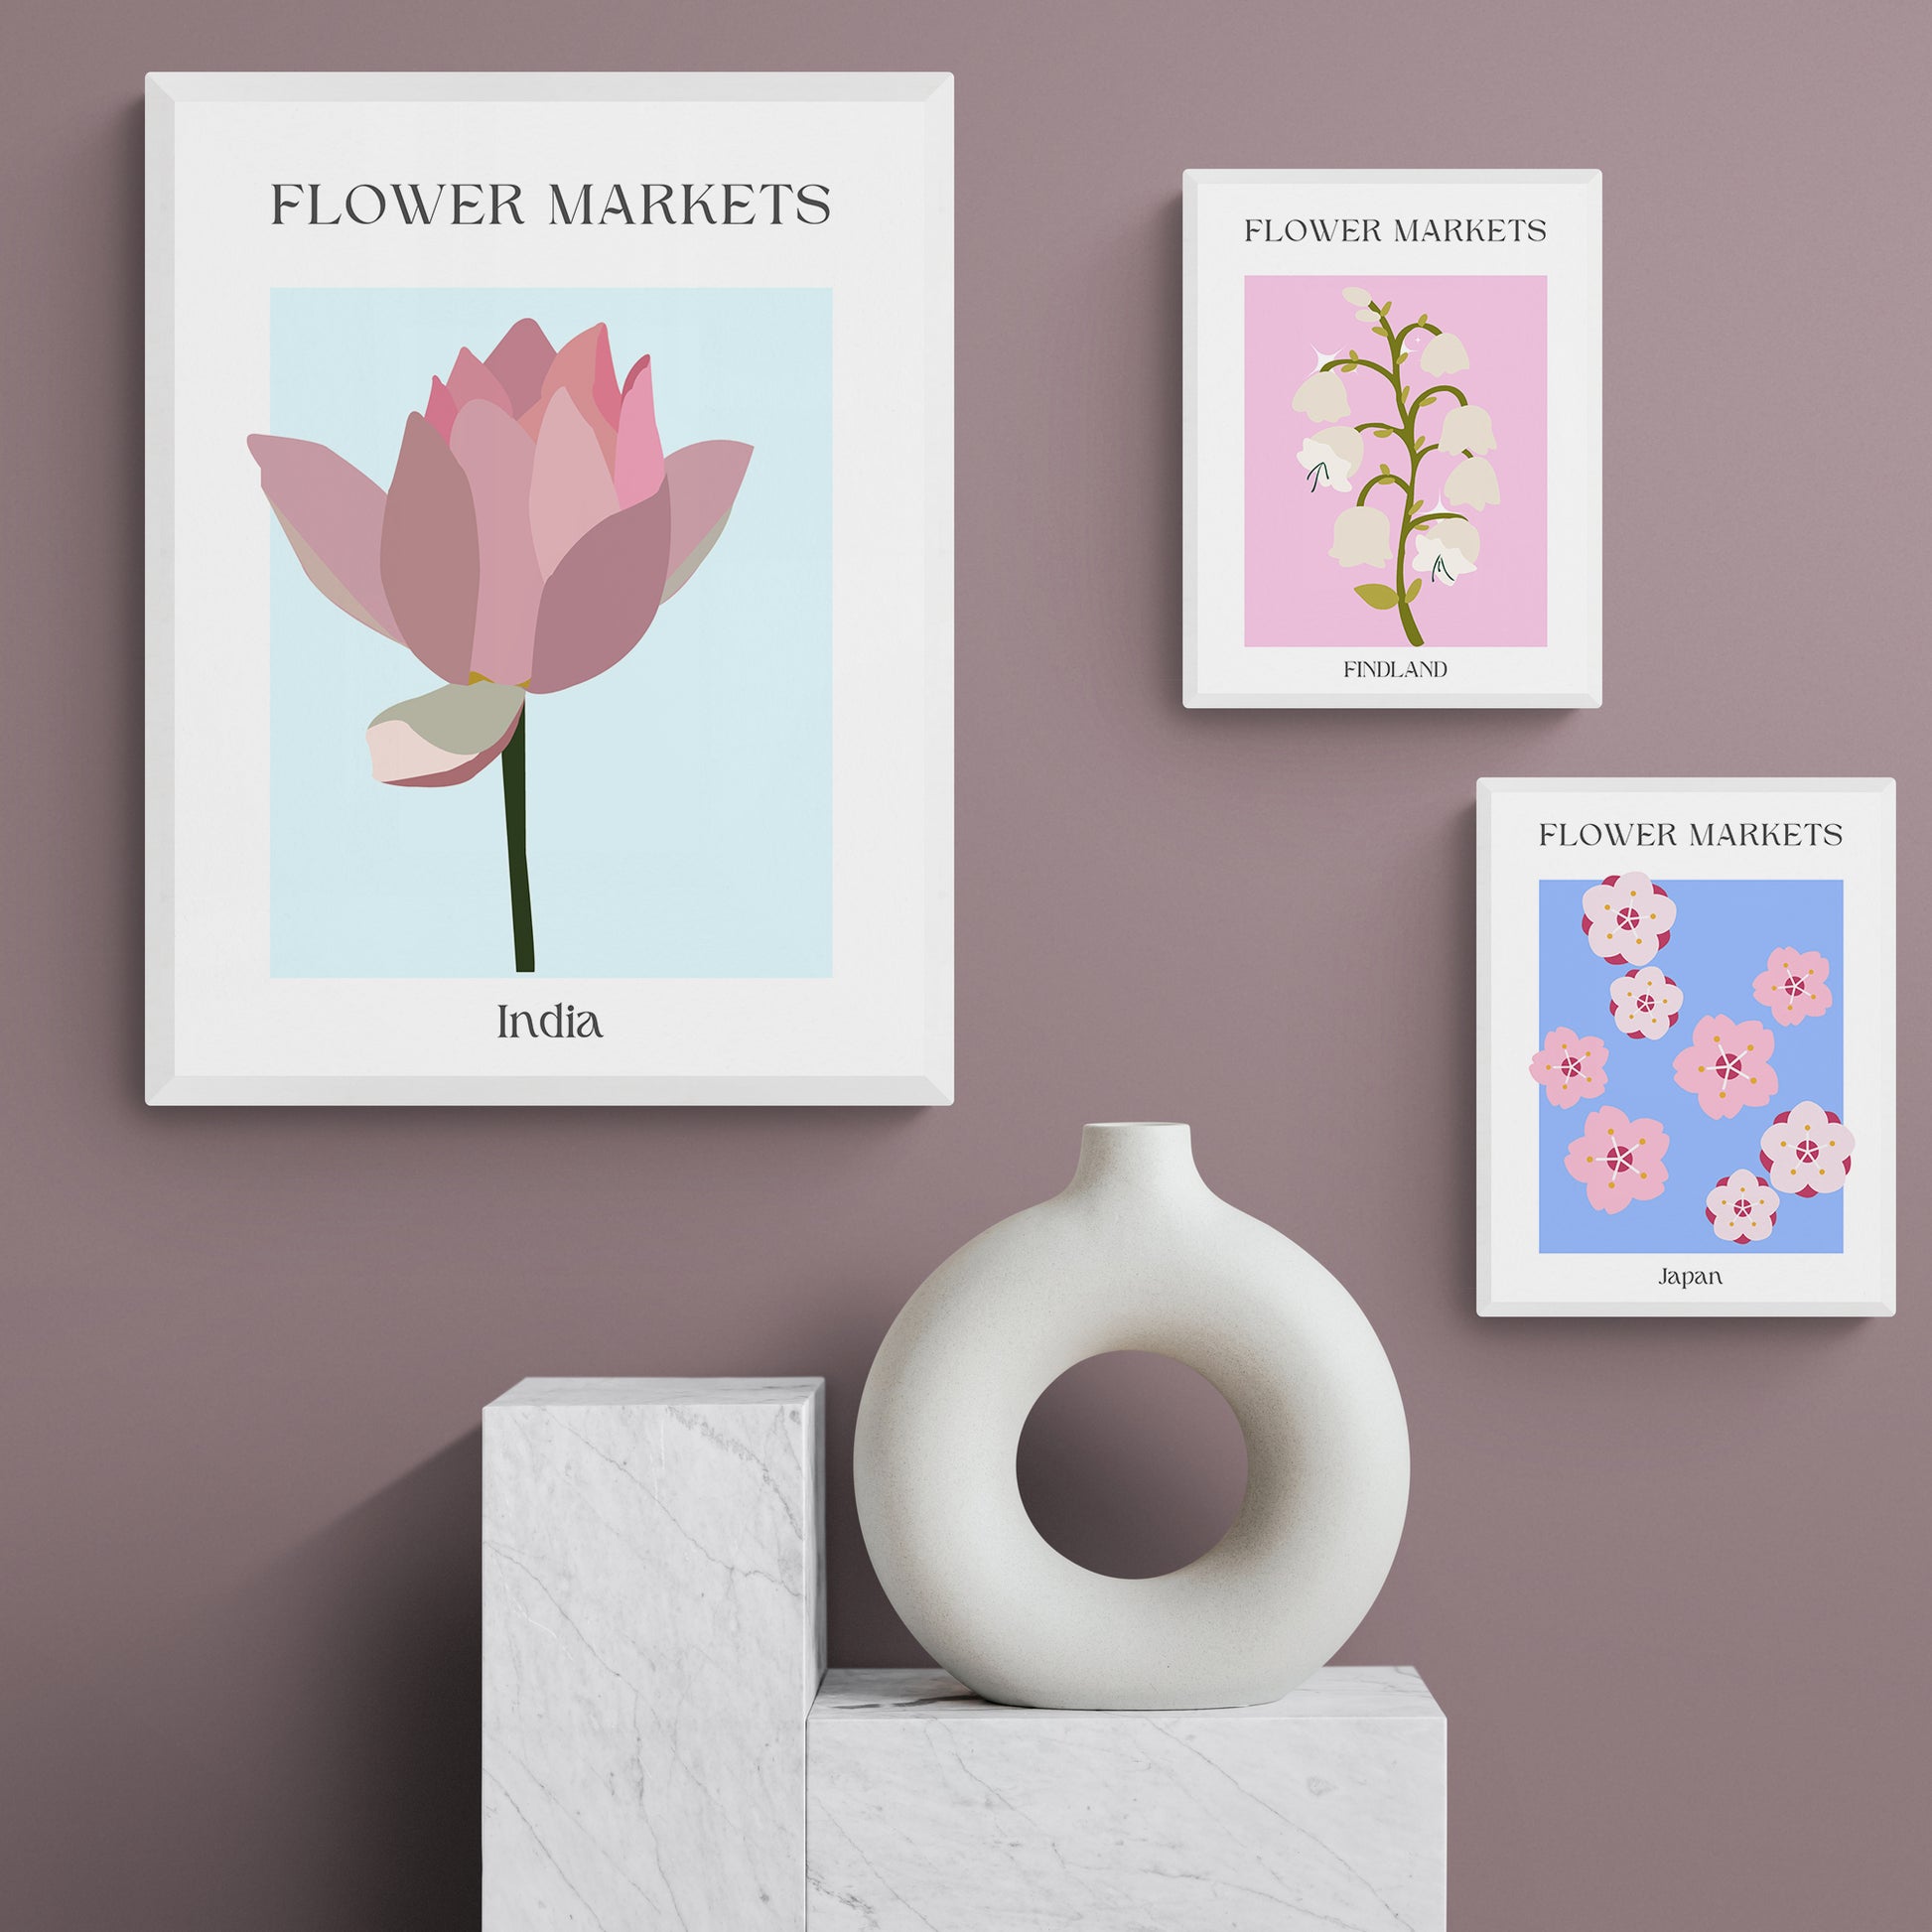 This Ucraine Flowers Market Print features bold abstract flowers in a variety of shapes and colors. Founded in Matisse Art, this unique decorative piece will brighten any space, inspiring creative gallery walls and cozy pastel rooms. Make a statement with this Danish-inspired wall art print.